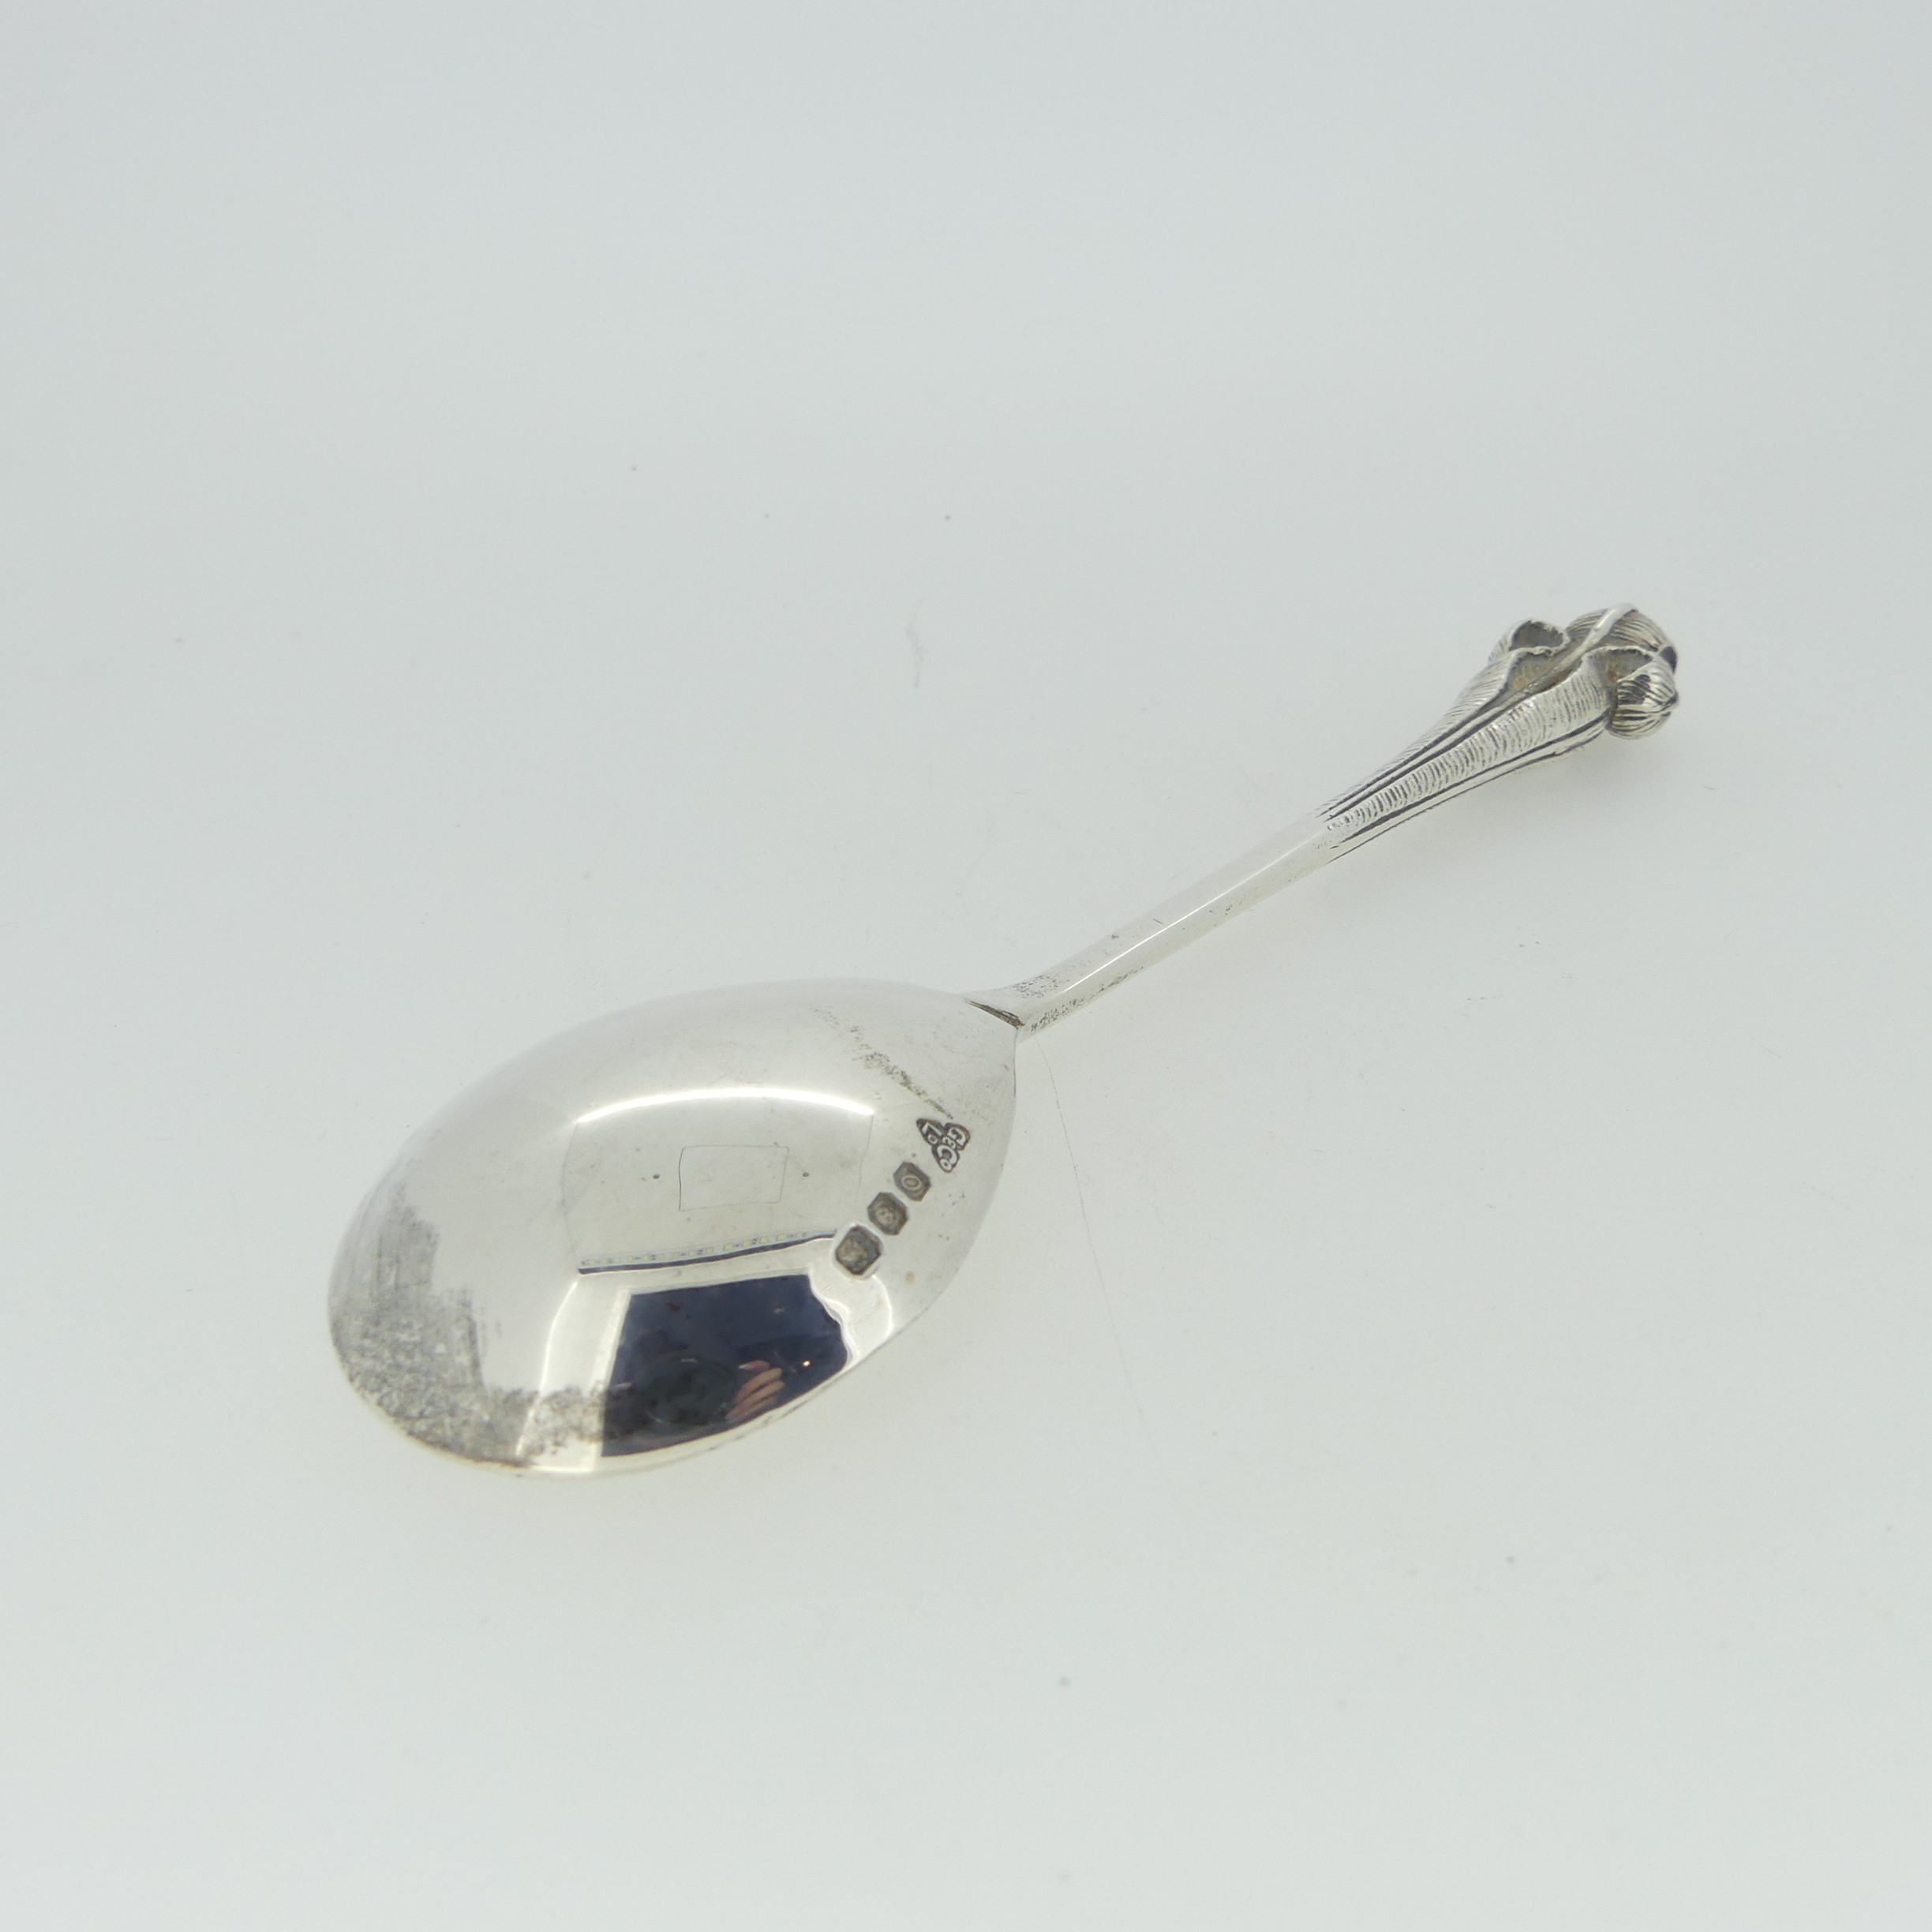 The Investiture of the Prince of Wales, Caernarfon Castle, 1969; A commemorative silver Spoon, by - Image 3 of 4